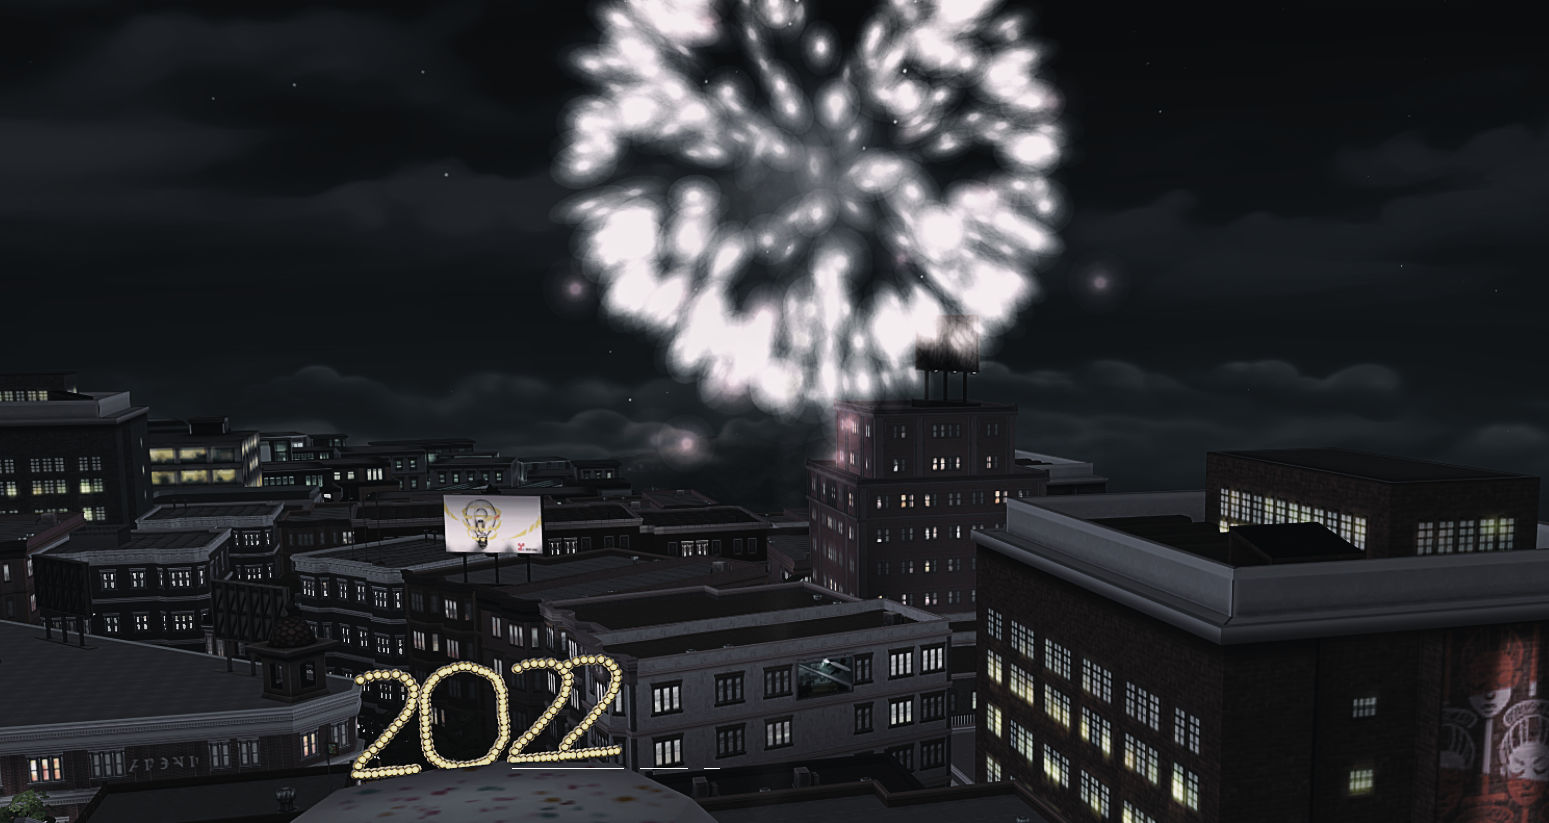 The Sims 4: 2021 was the year of modders and CC creators